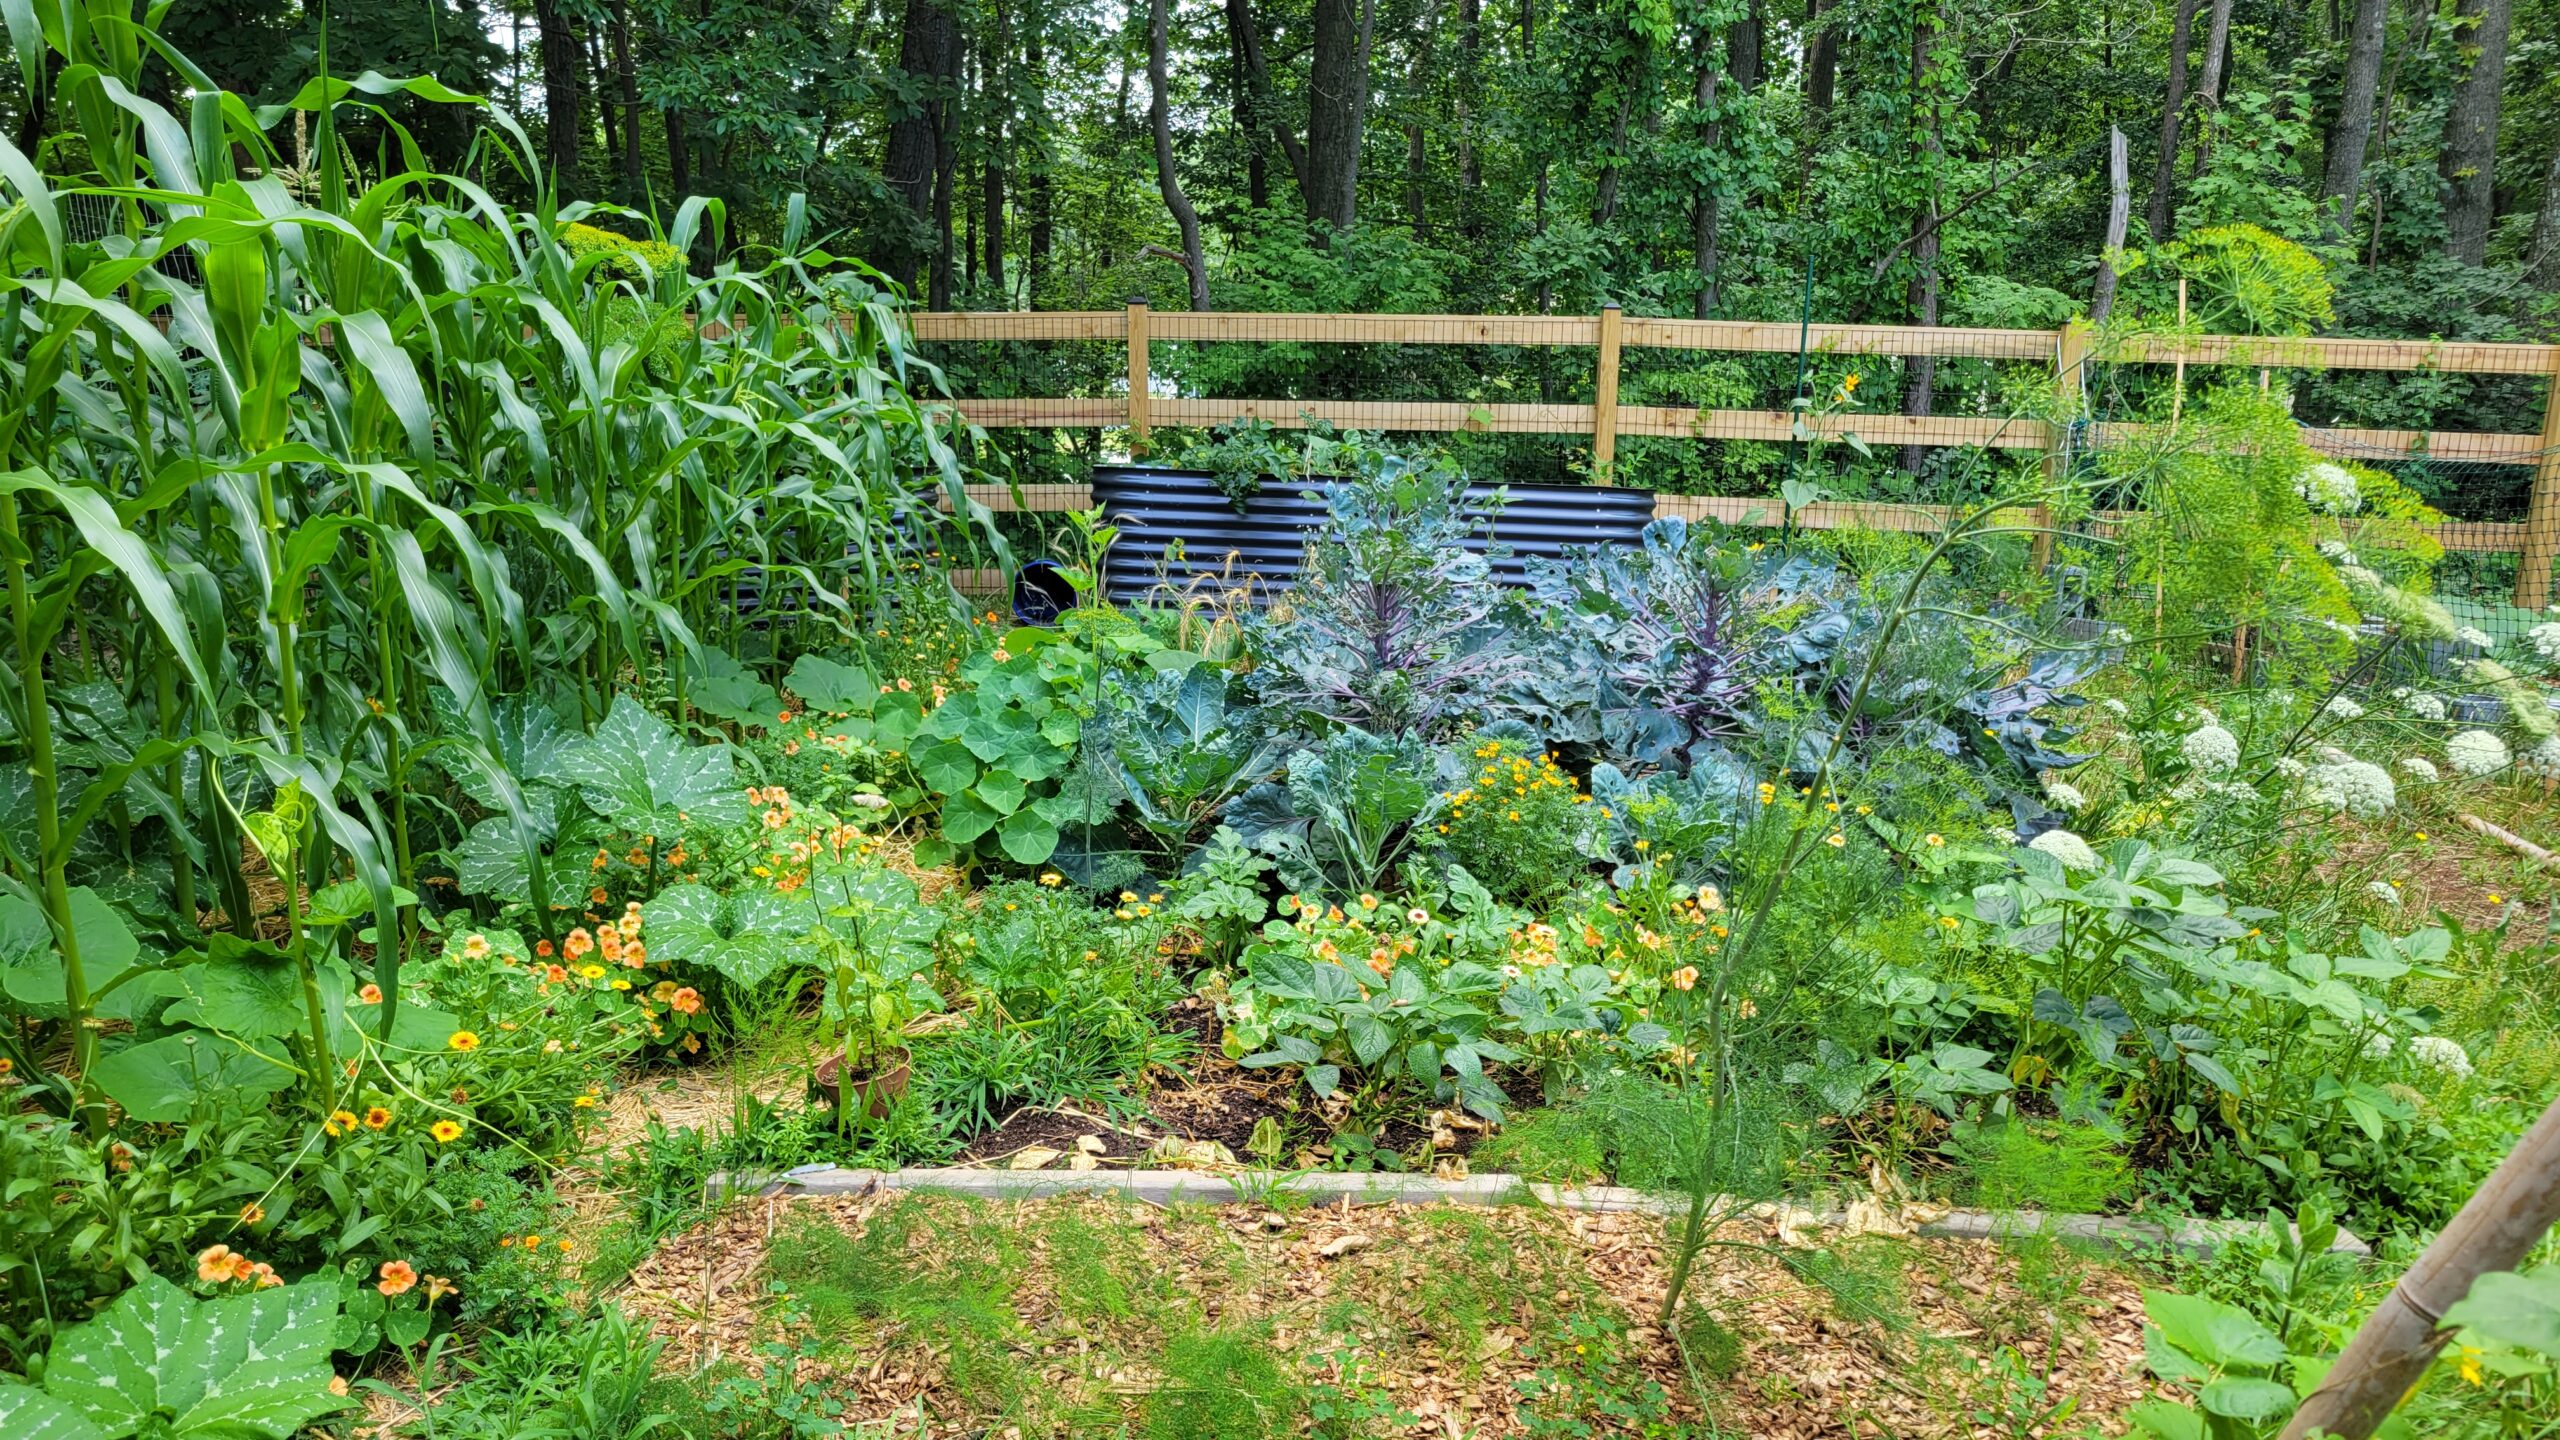 Photo of a garden plot in mid-summer. Left to right: corn stalks, squash vines, flowers, potatoes, Brussels sprouts, beans, carrots and dill flowering.